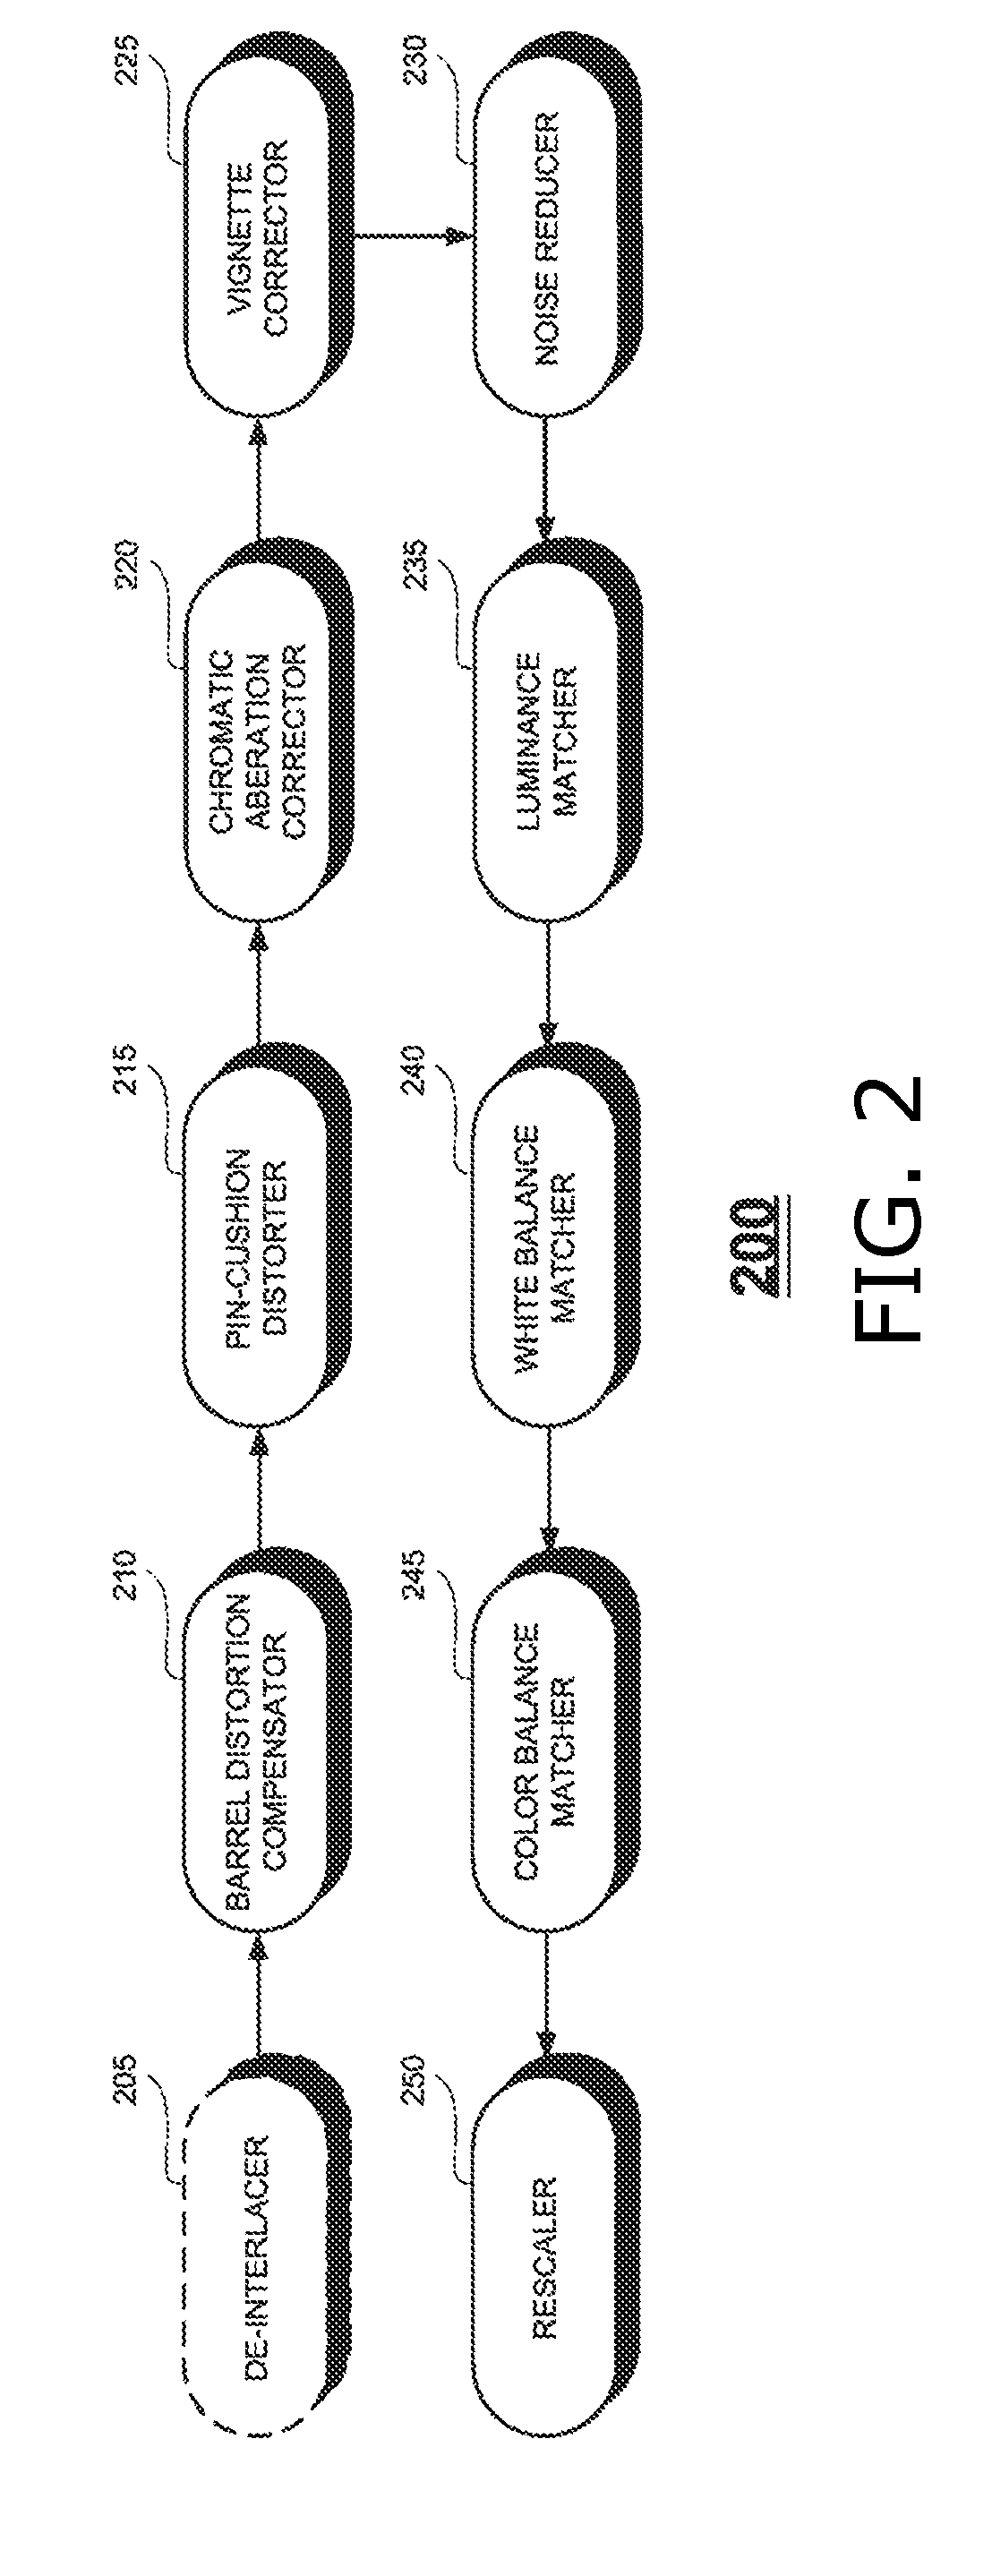 Automated processing of aligned and non-aligned images for creating two-view and multi-view stereoscopic 3D images